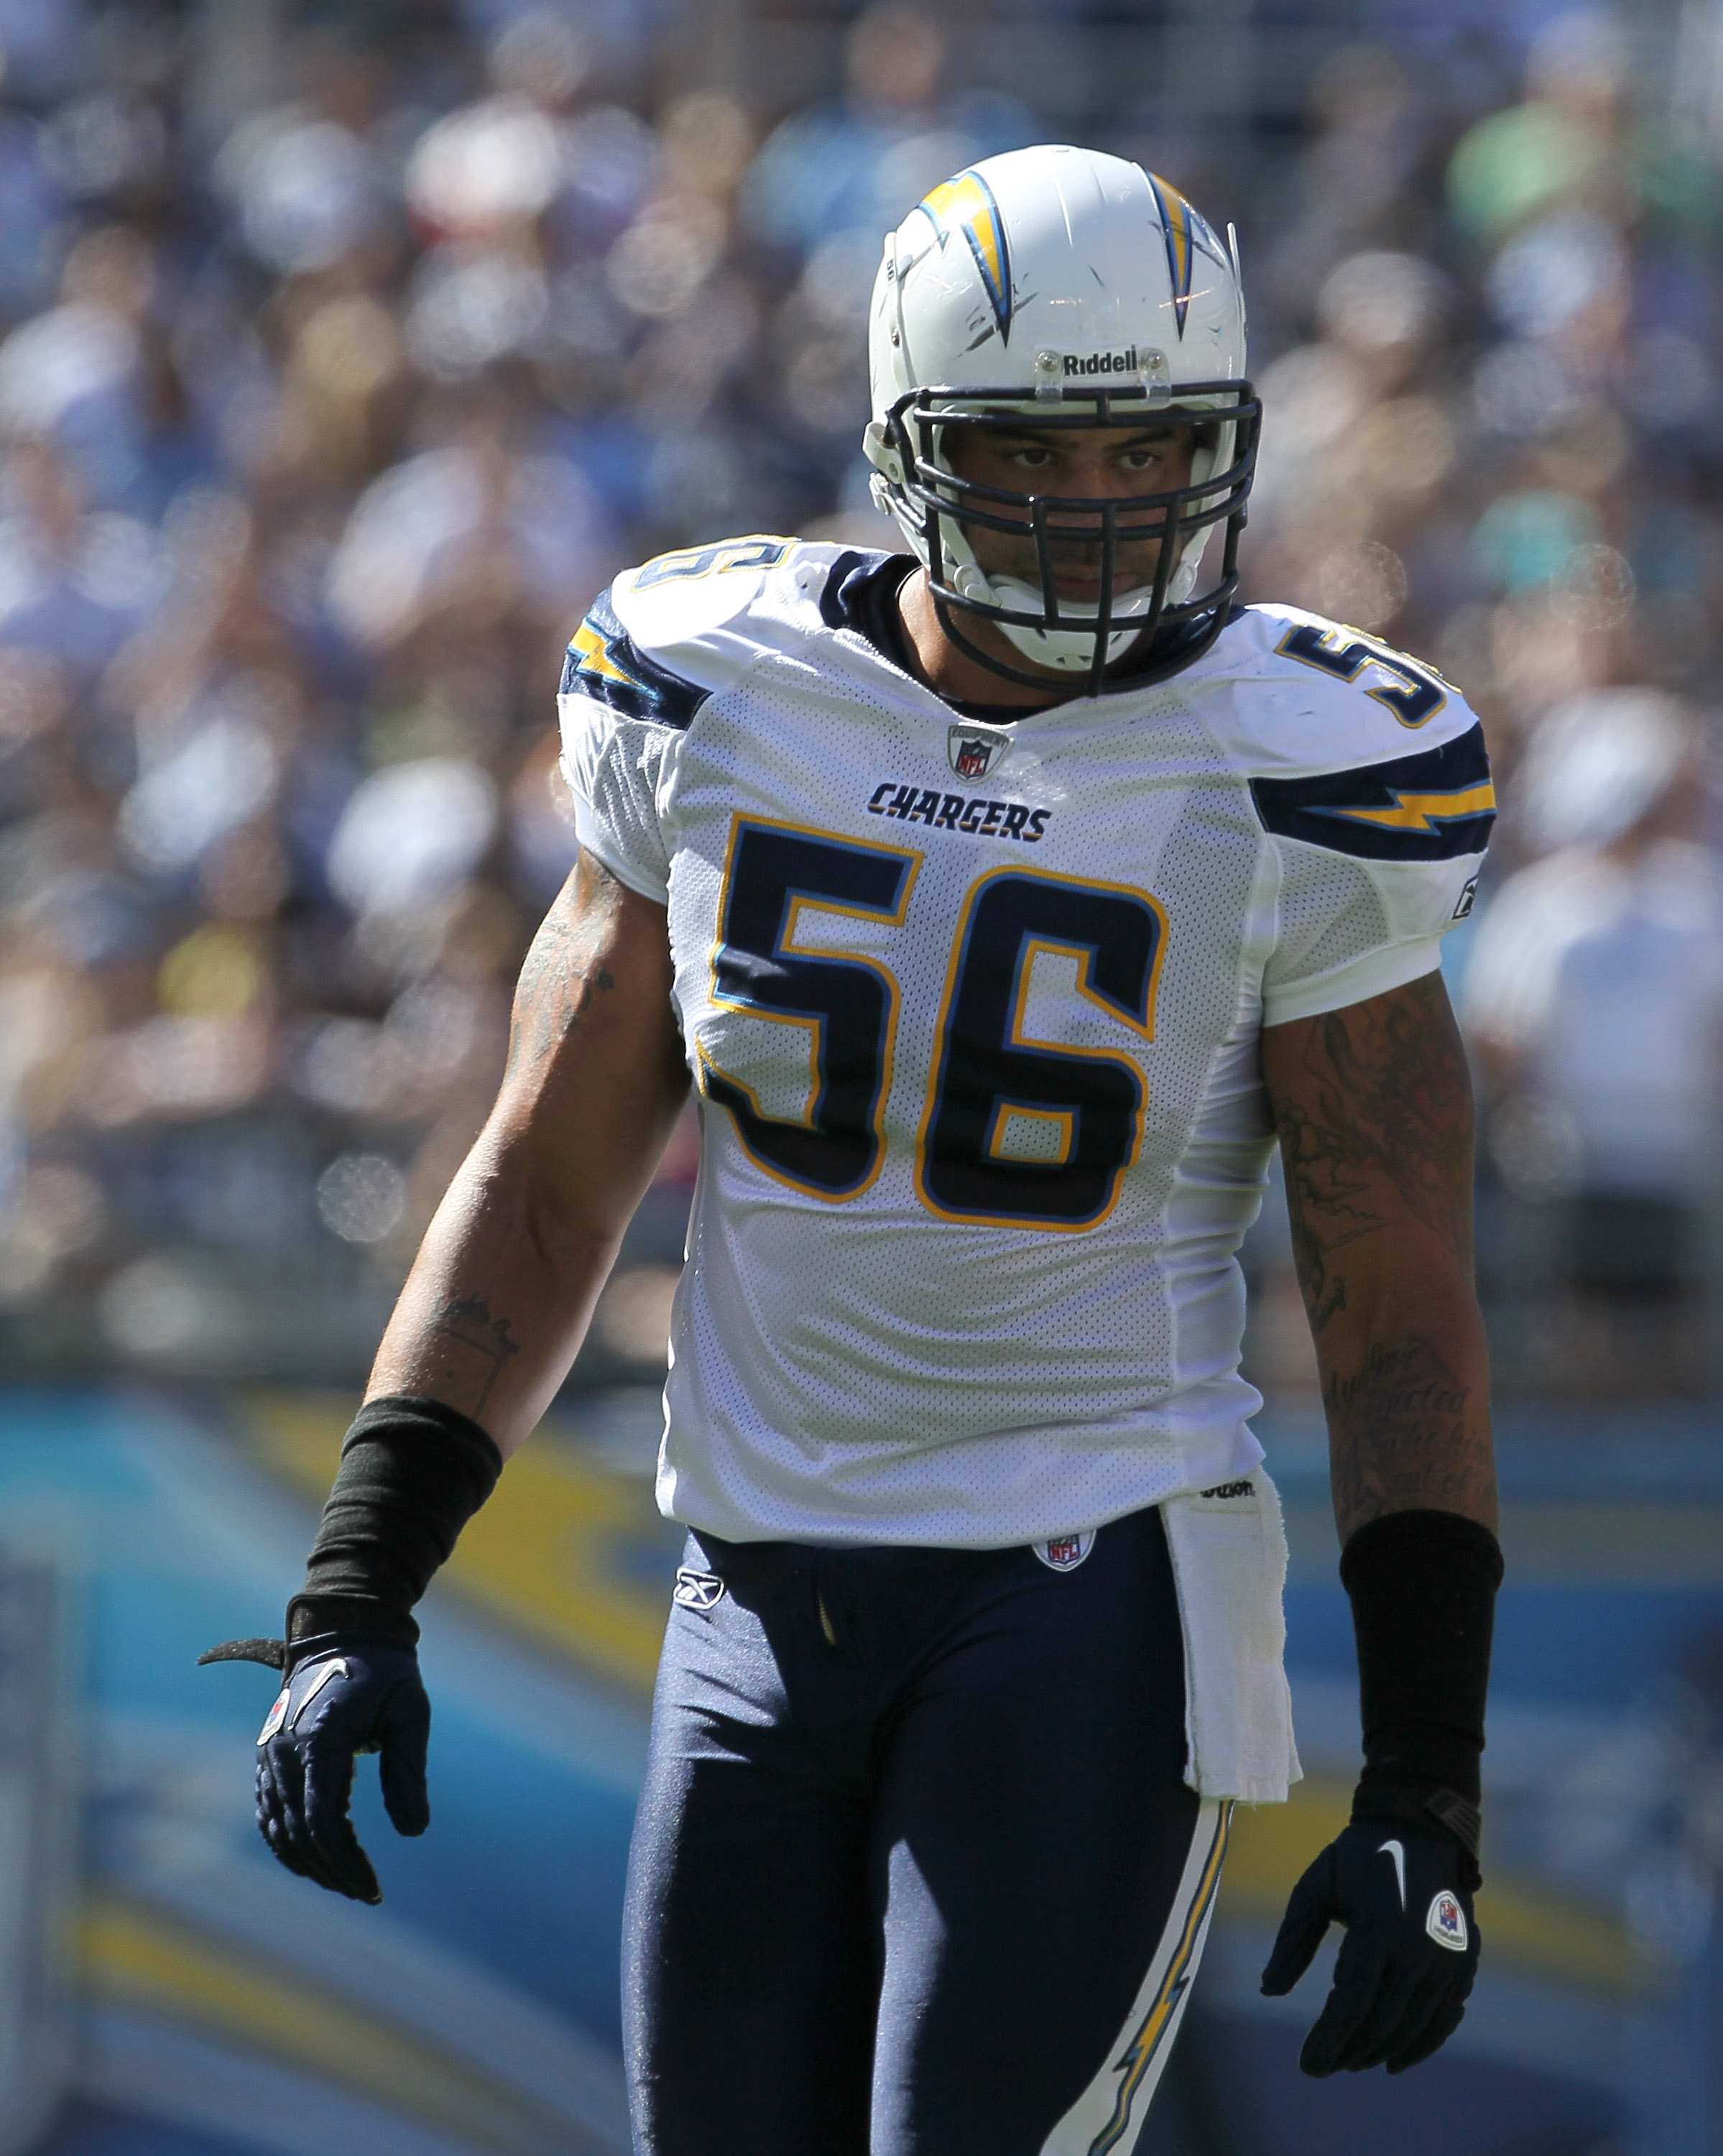 Lights On: Where Will Waived Shawne Merriman Hang His Jersey